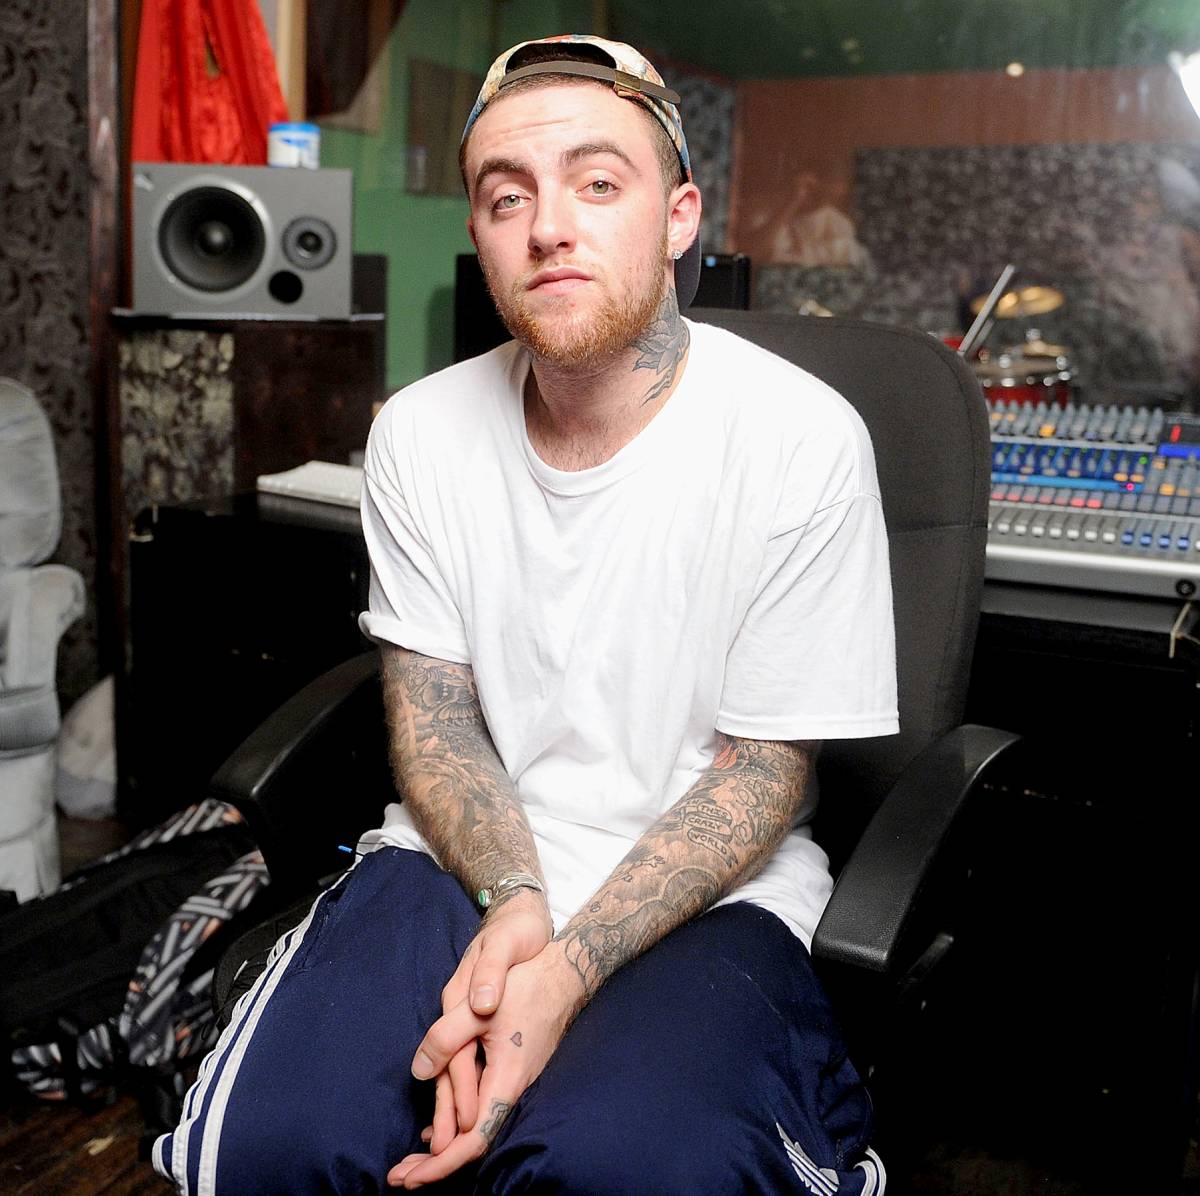 How Mac Miller’s Family Is Coping With His ‘Unexpected’ Death